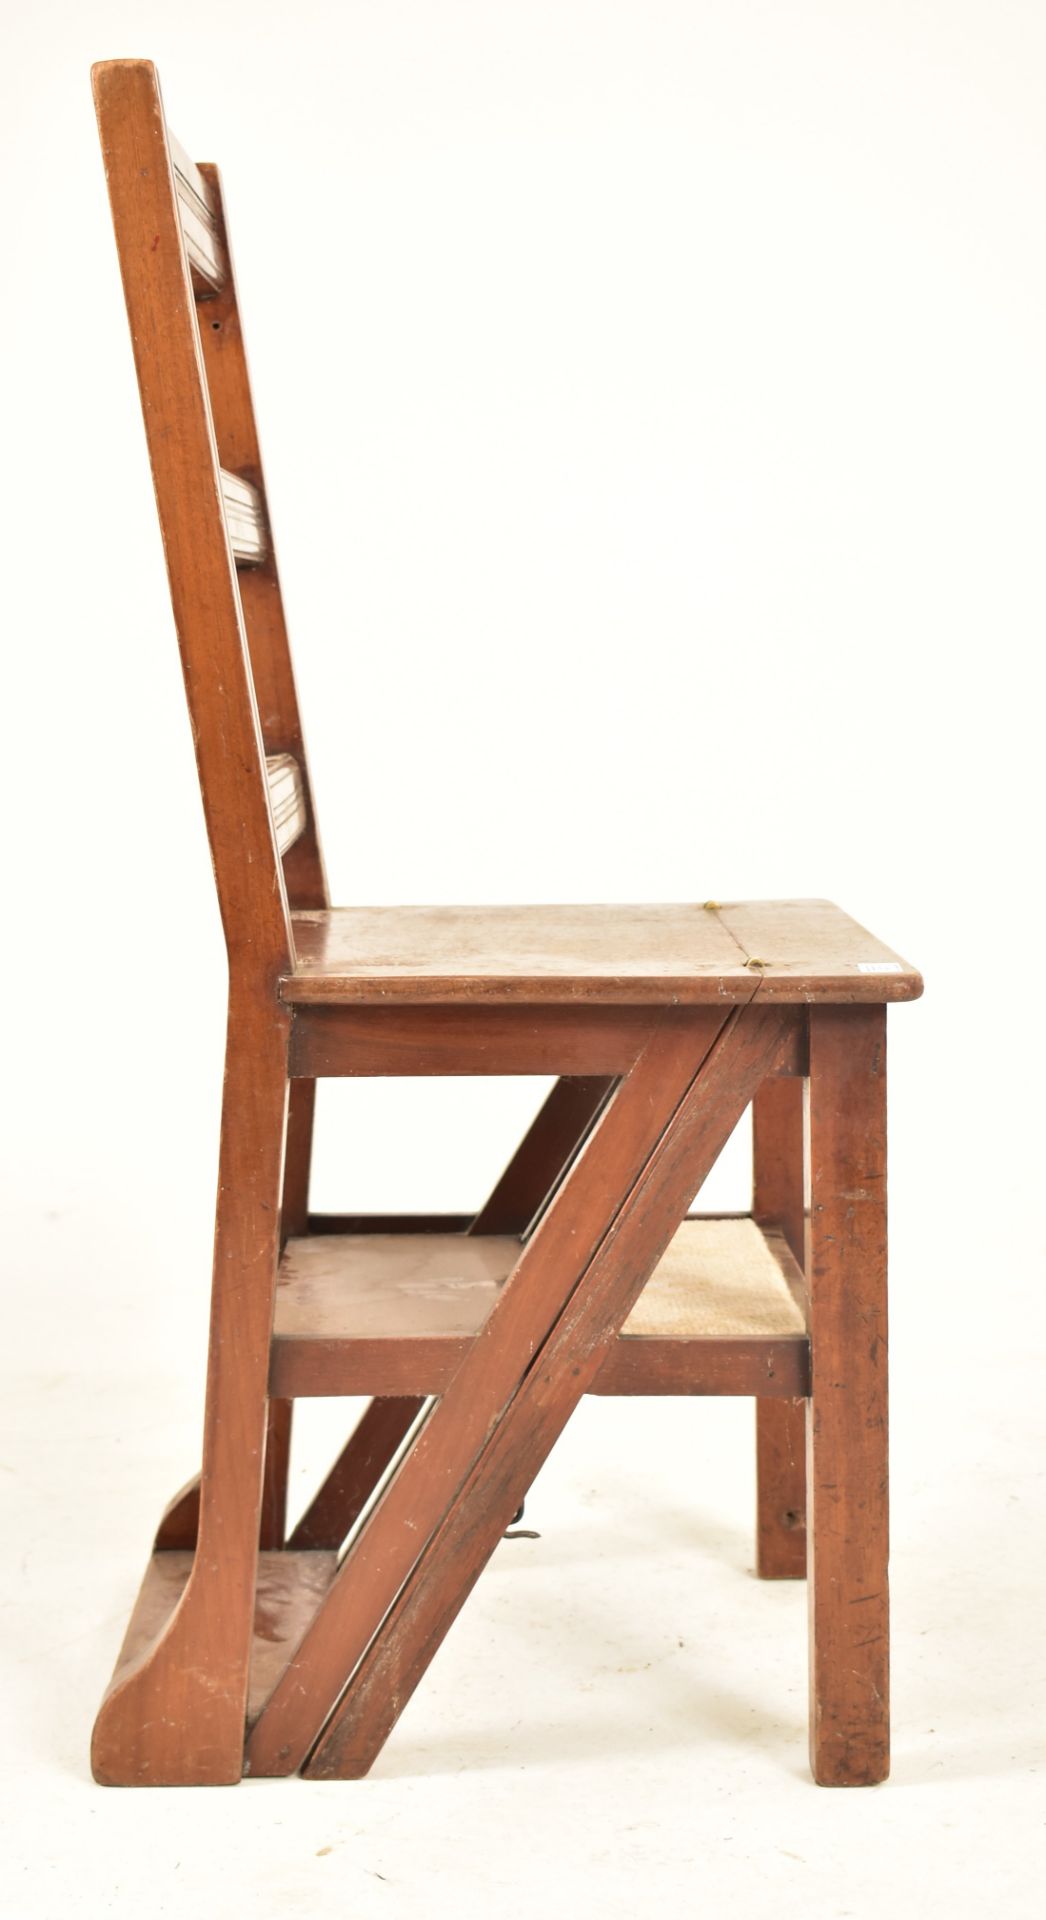 LATE VICTORIAN MAHOGANY METAMORPHIC FOLDING LIBRARY CHAIR - Image 2 of 6